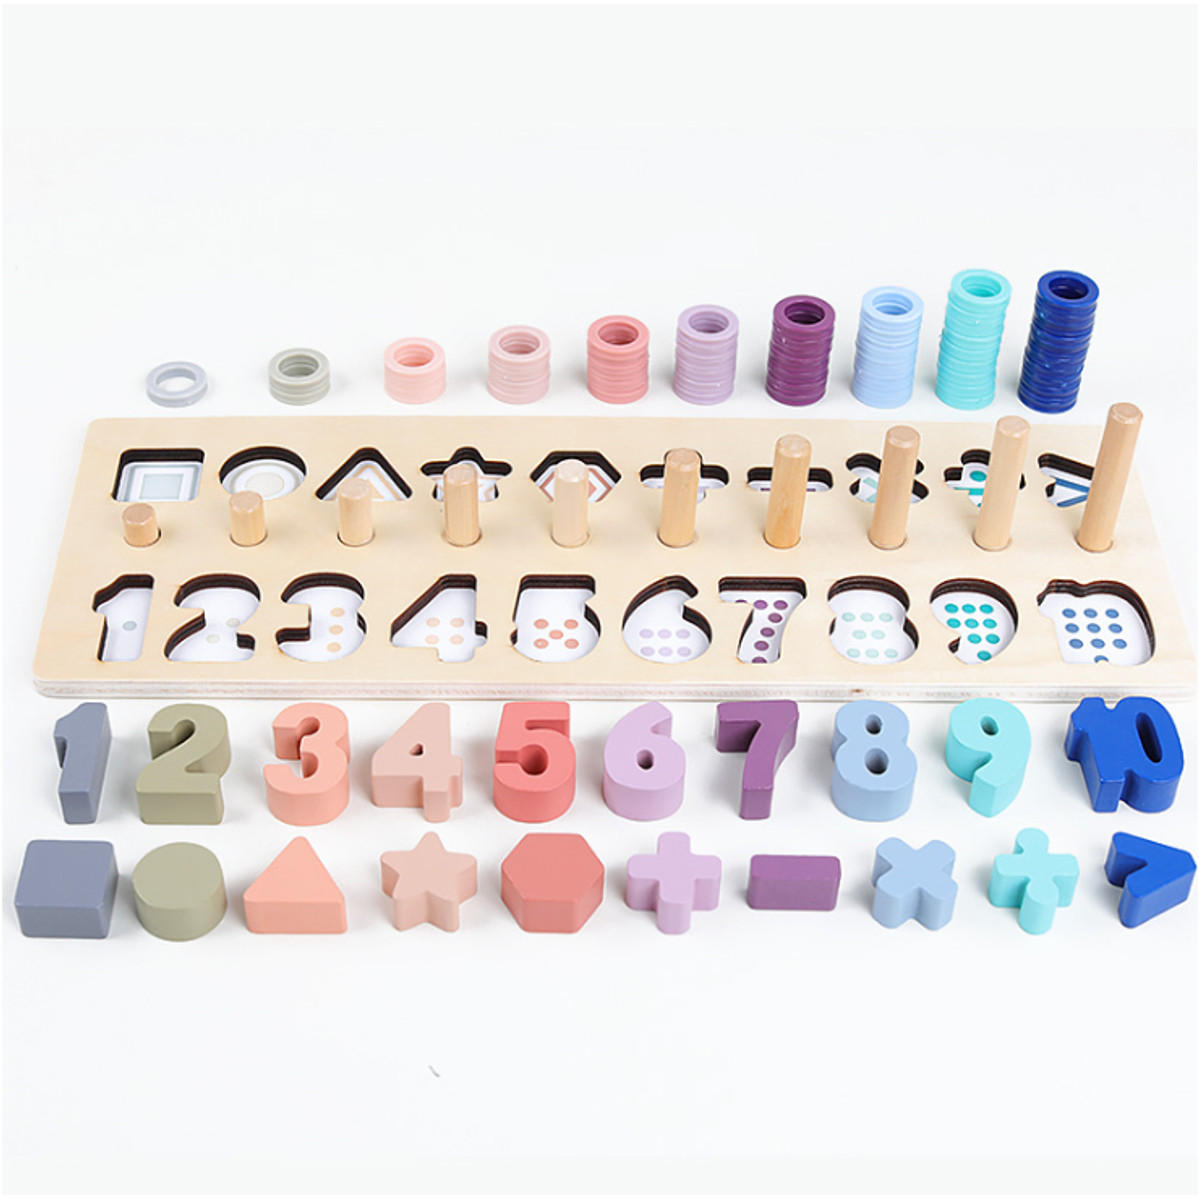 

Baby Montessori Math Toys Digital Shape Pairing Counting Board Kids Baby Children Educational Wooden Toys Gift